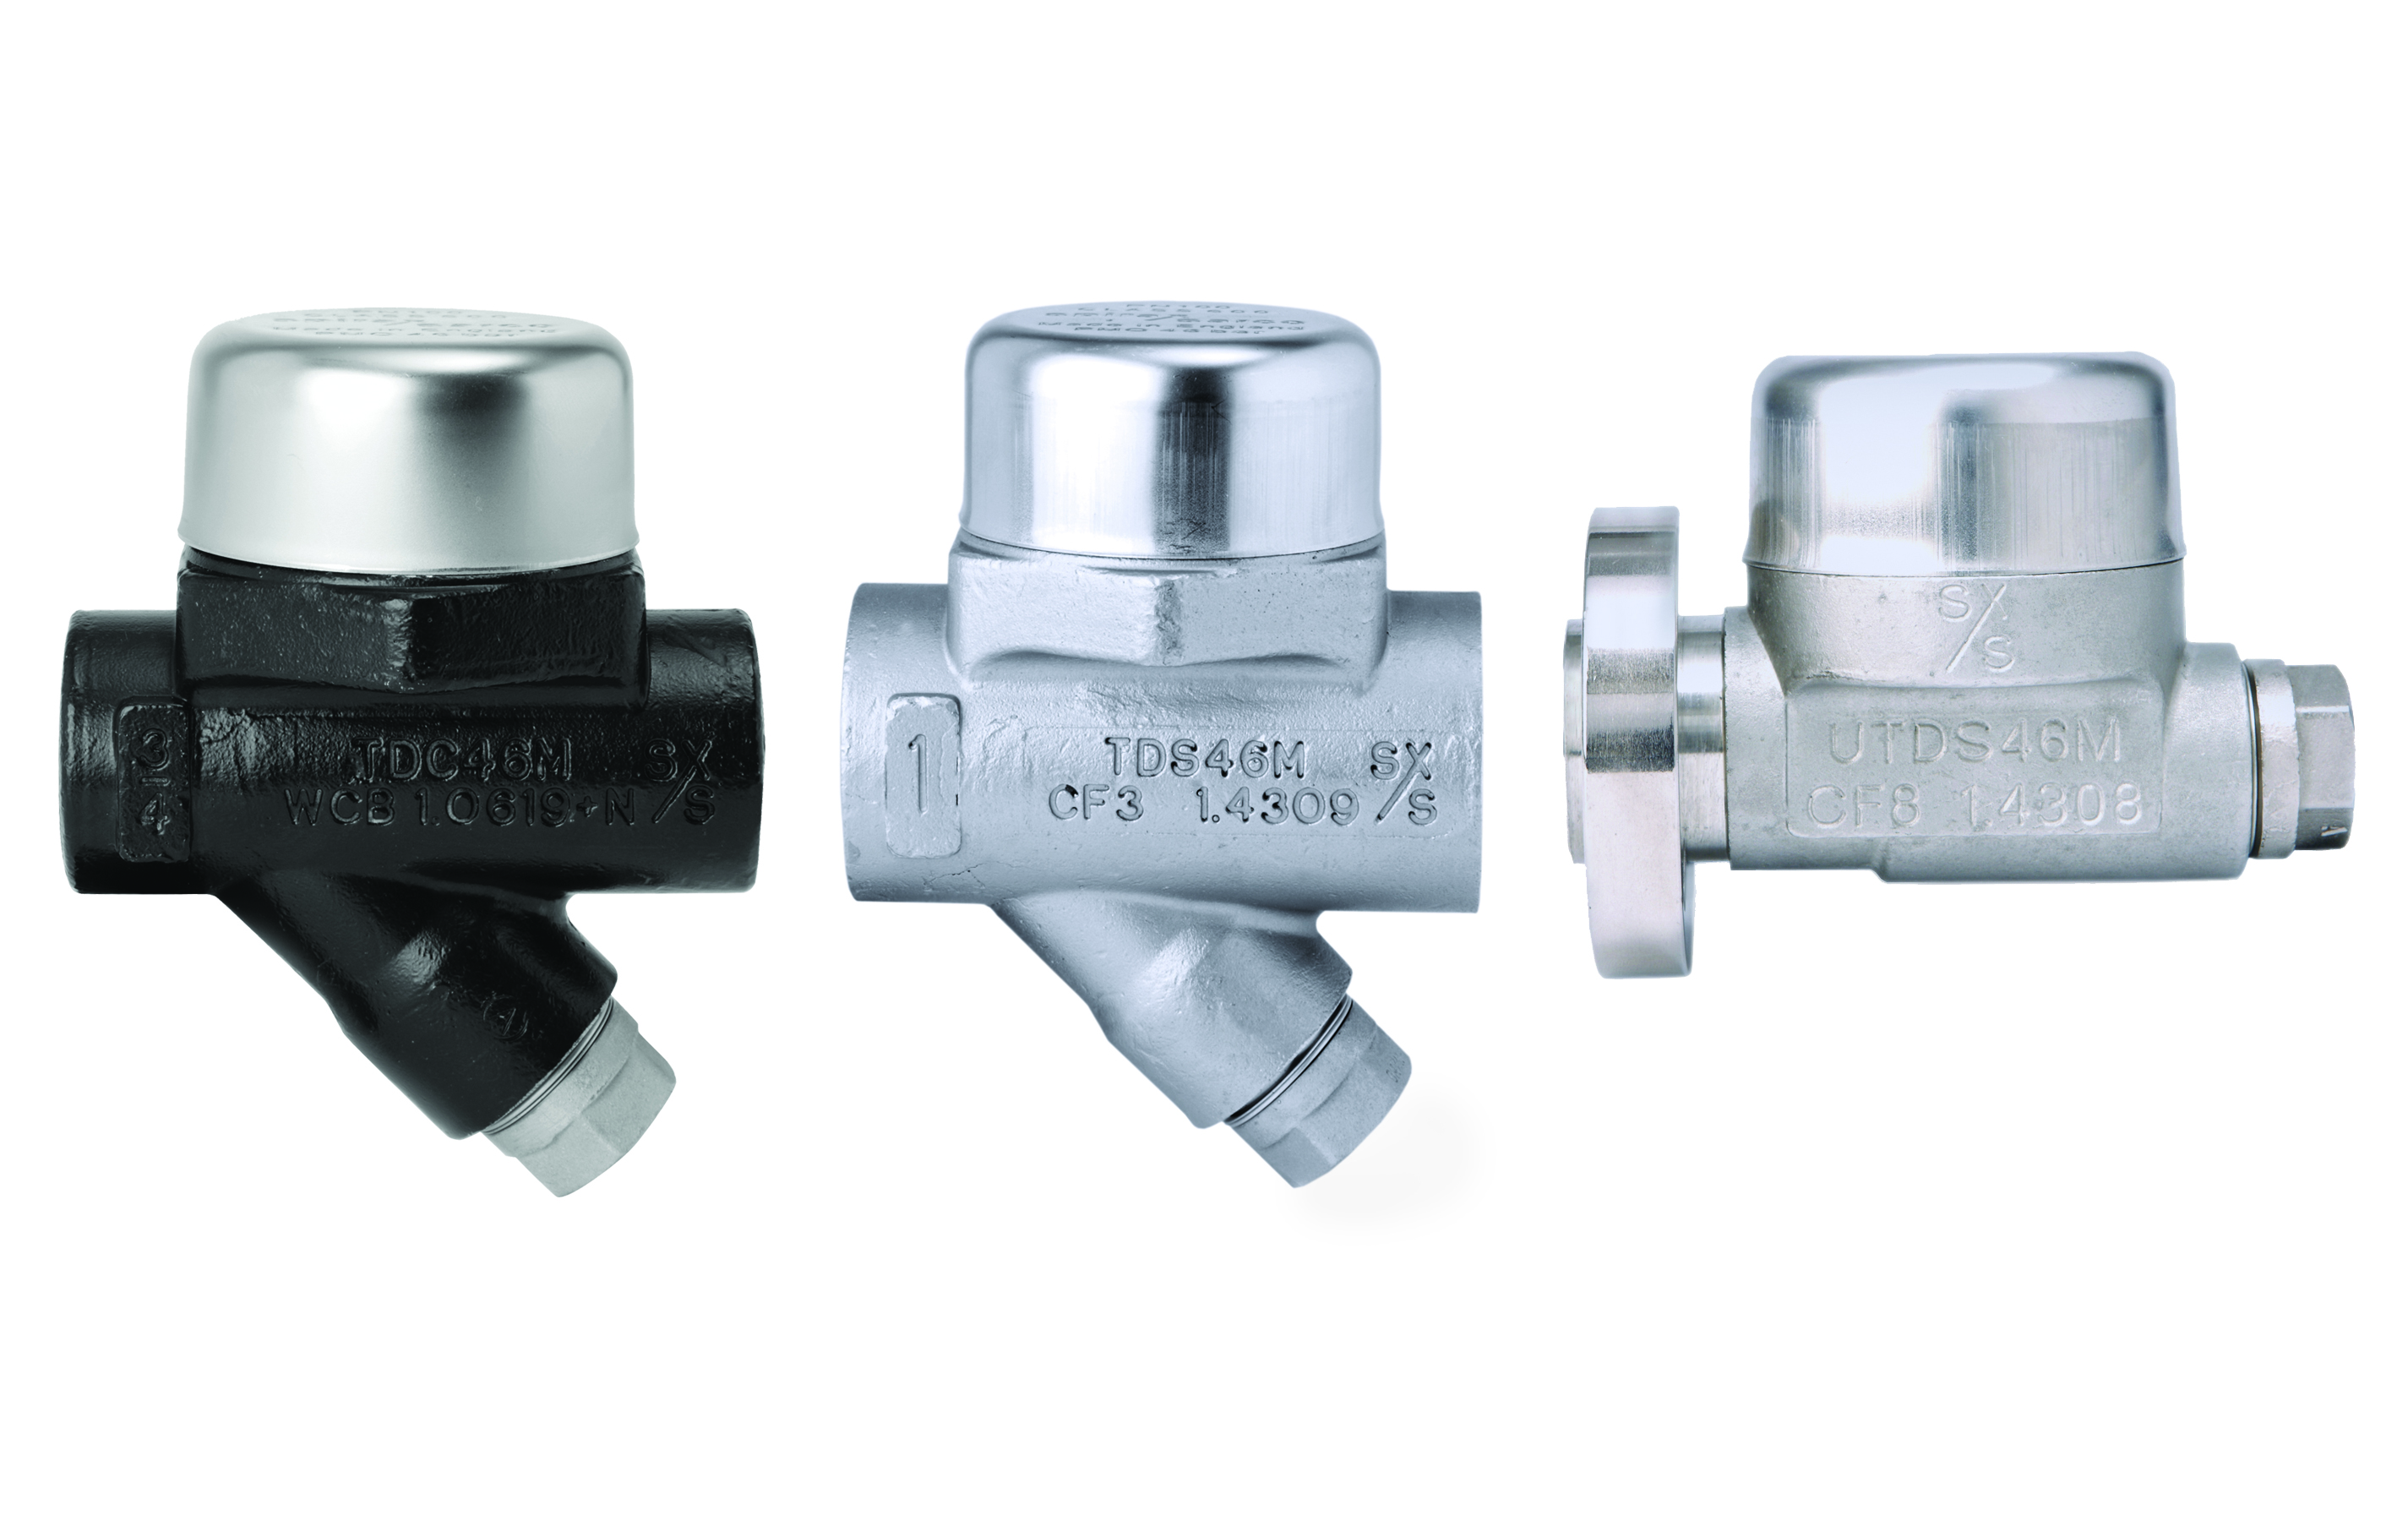 What Are Steam Trap Tags?